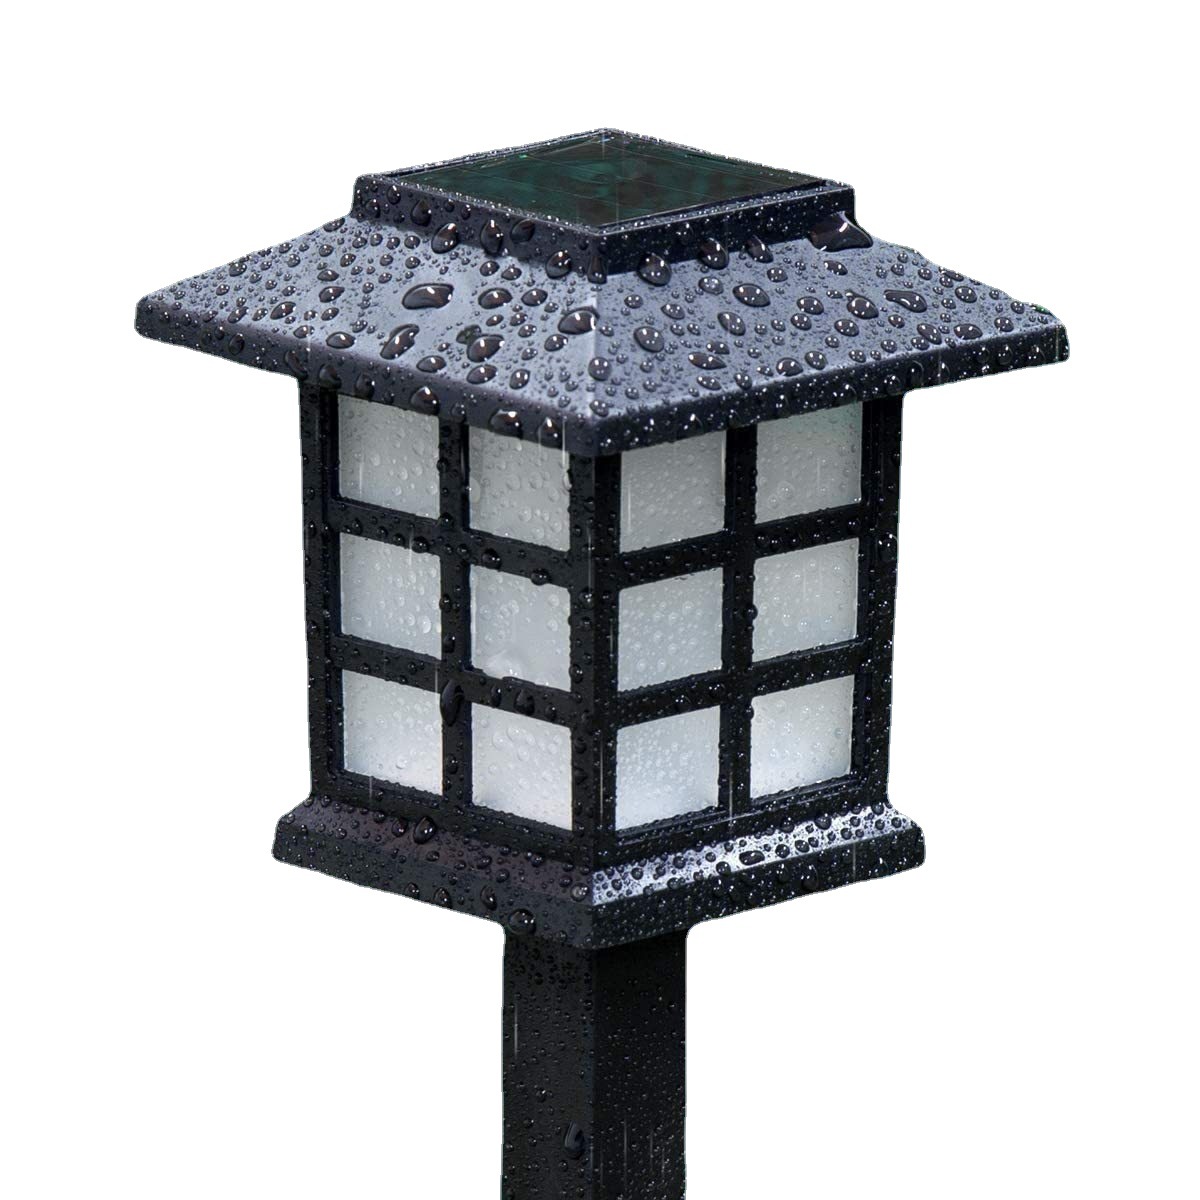 Small-sized solar lawn lights LED home and outdoor garden lights